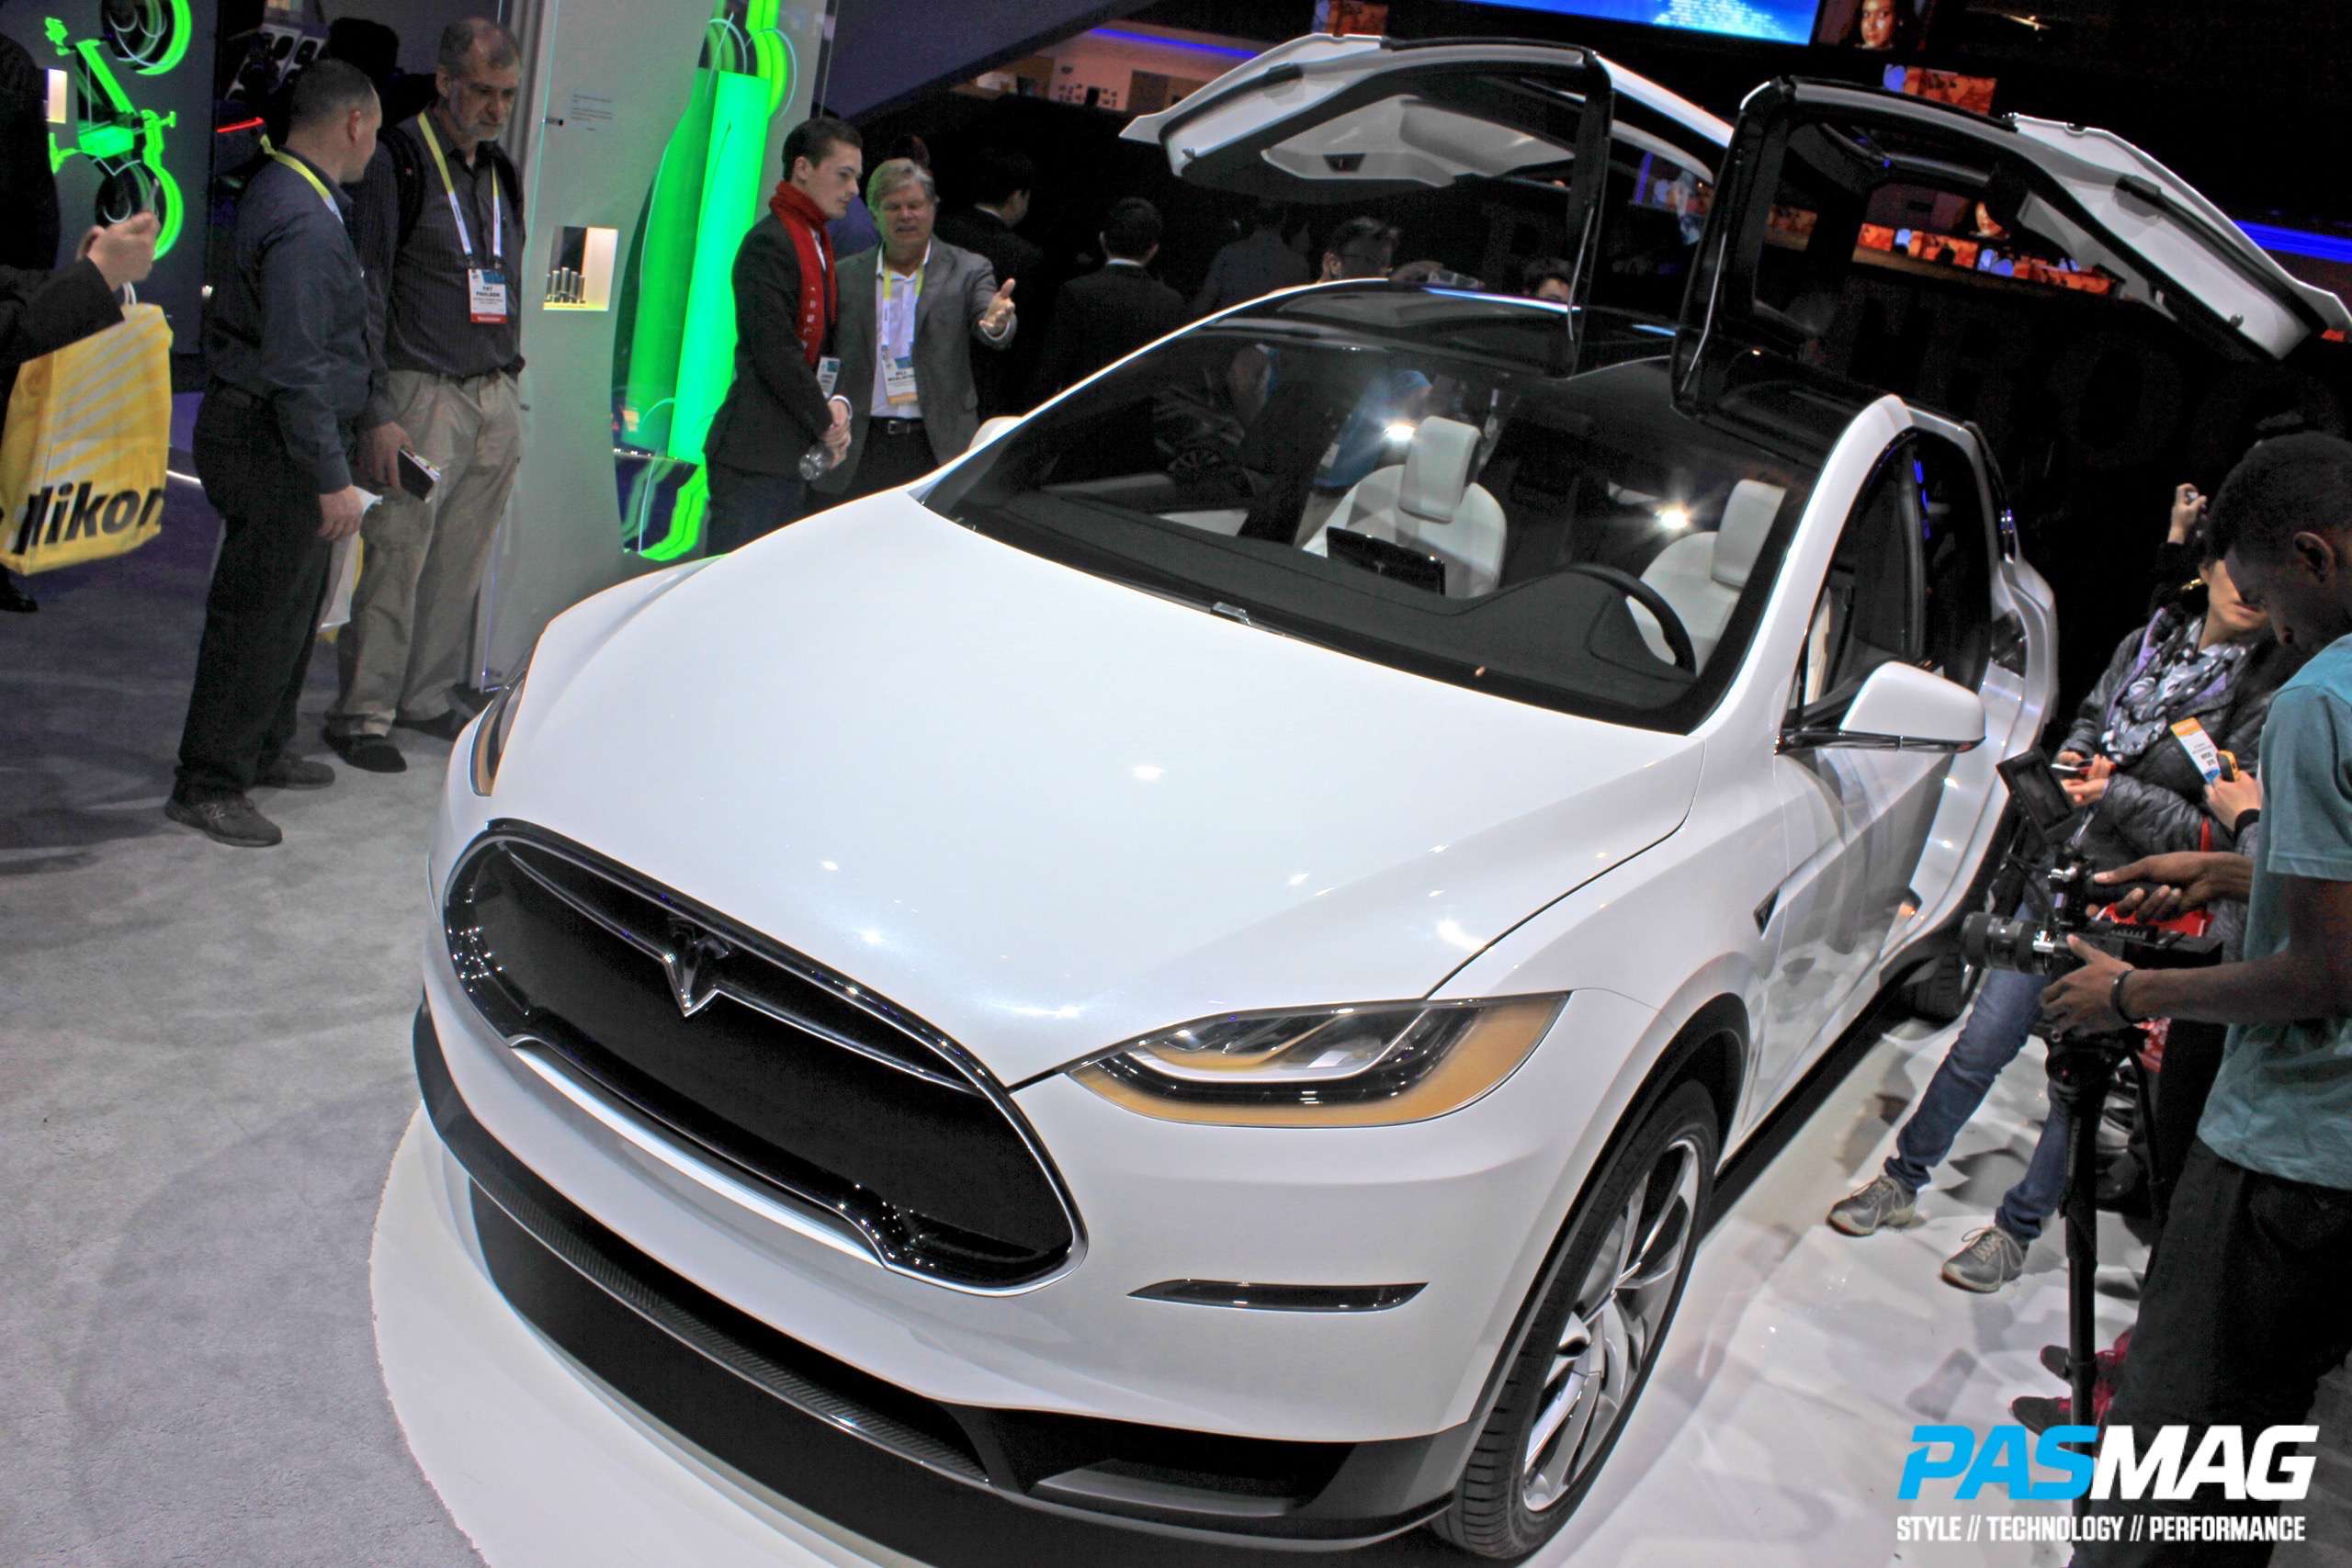 CES 2015 Coverage - Back to the Future